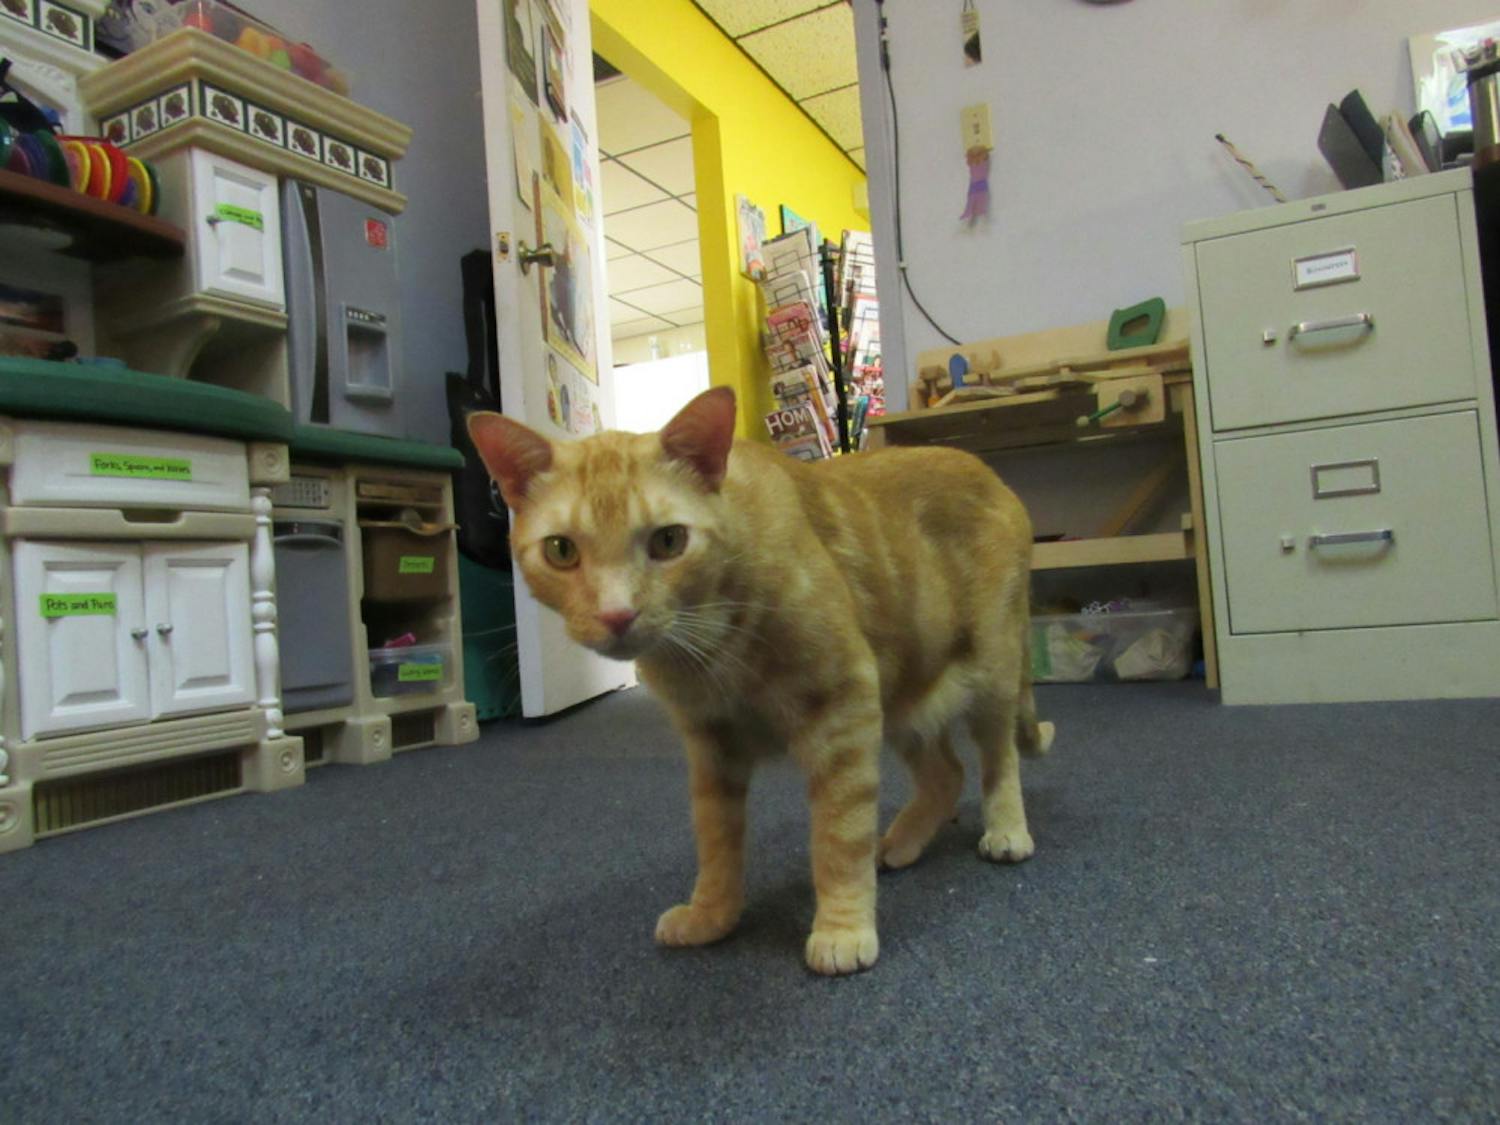 Hank, the Child Advocacy Center's "AdvoCat," roams the office looking for treats. The orange cat found a home at the Center in June and often plays with kids who visit the office.&nbsp;